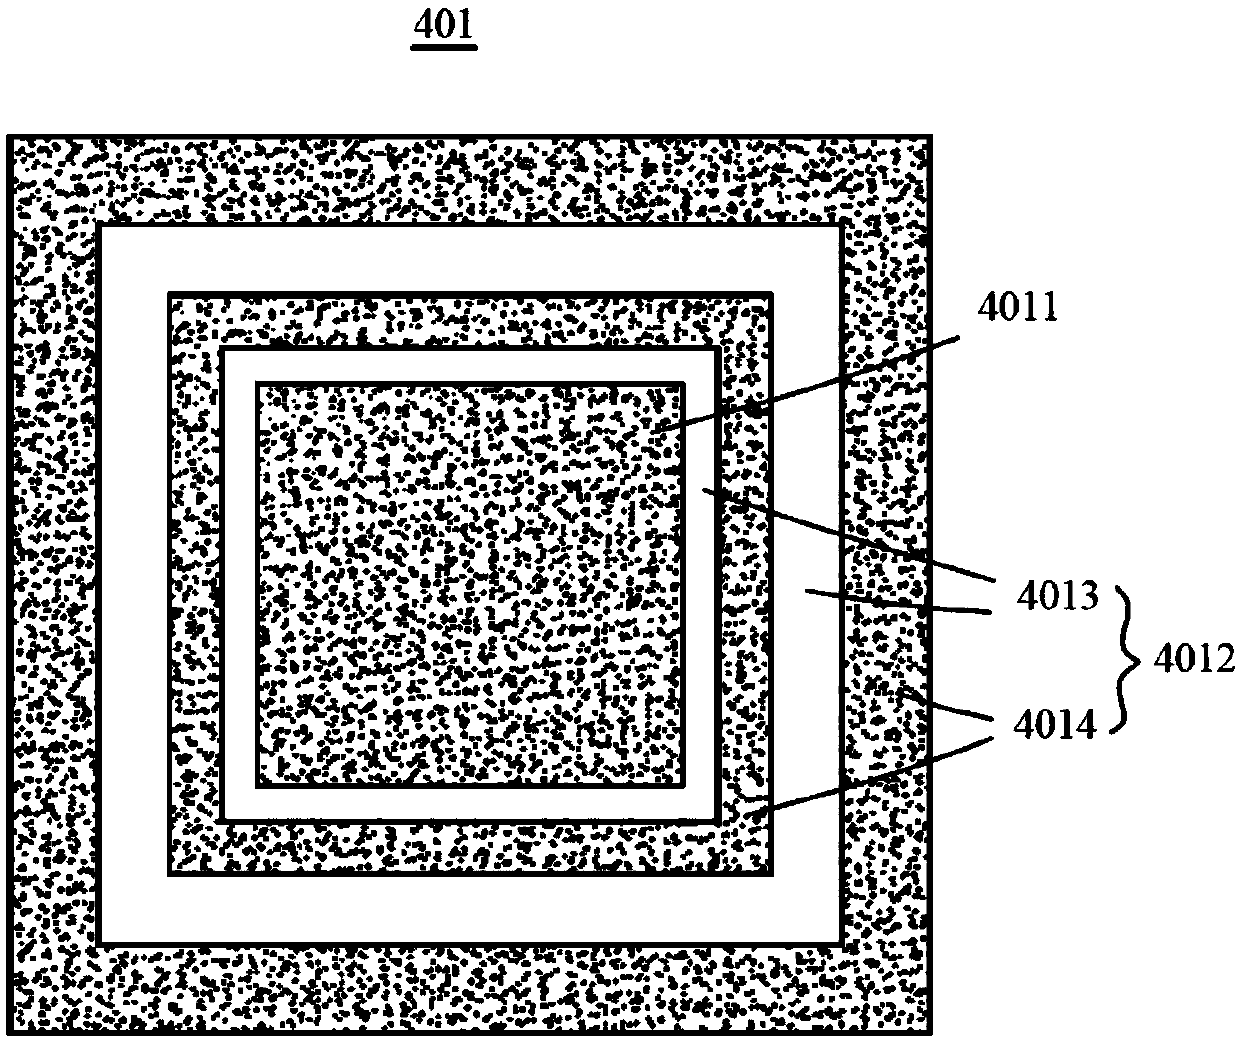 Photomask structure and method for forming through holes in negative photoresistive pattern, as well as application